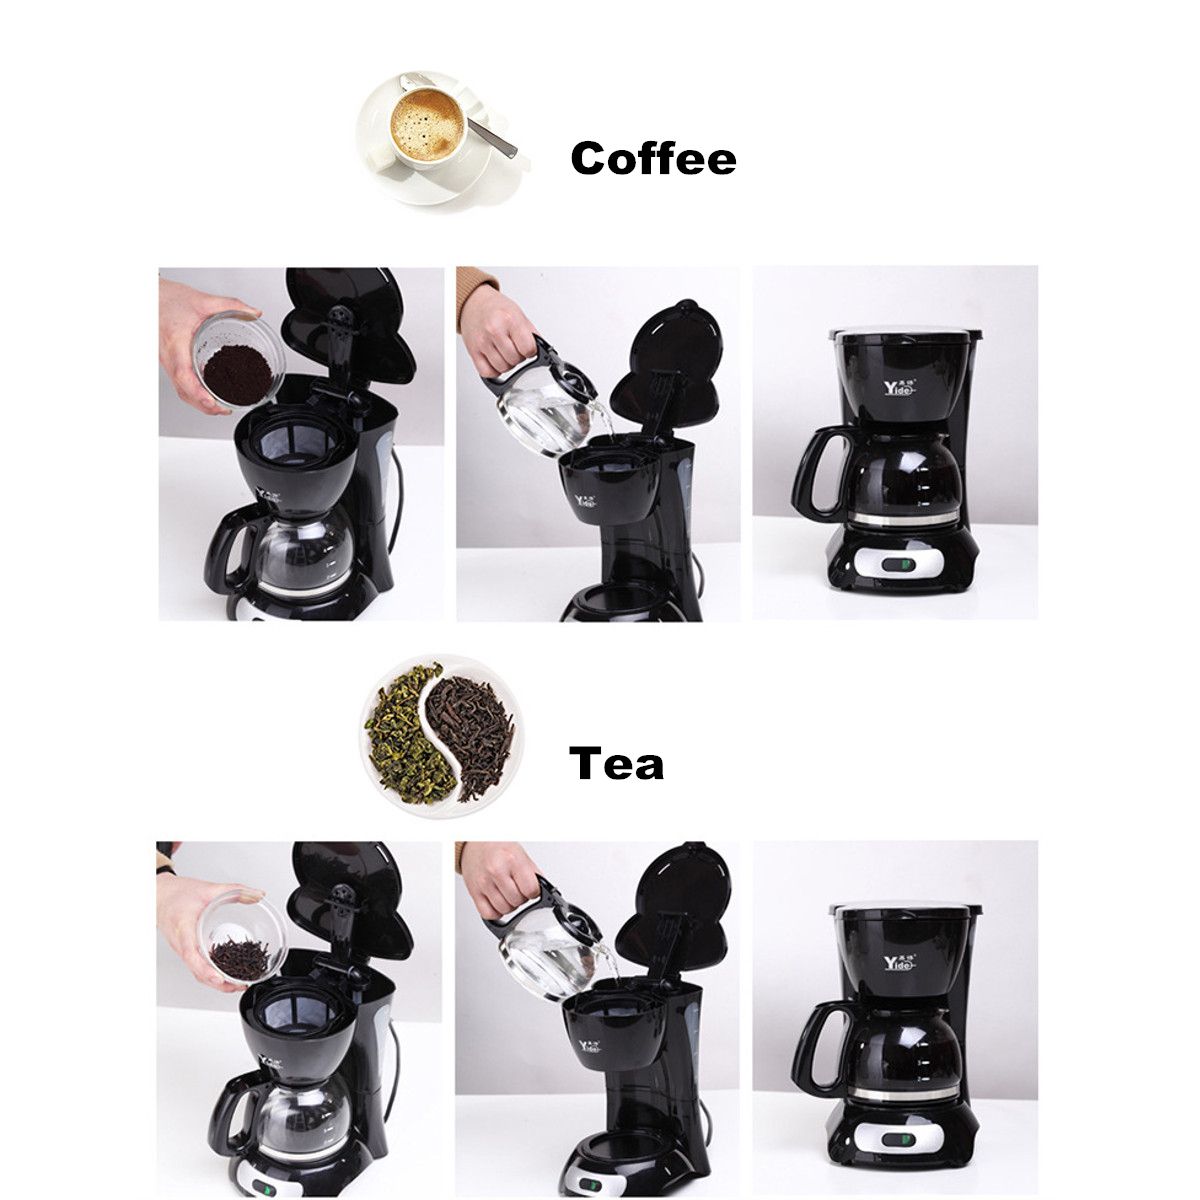 220V-Small-Drip-Commercial-American-Coffee-Machine-Automatic-Maker-Insulation-4-6-People-1450167